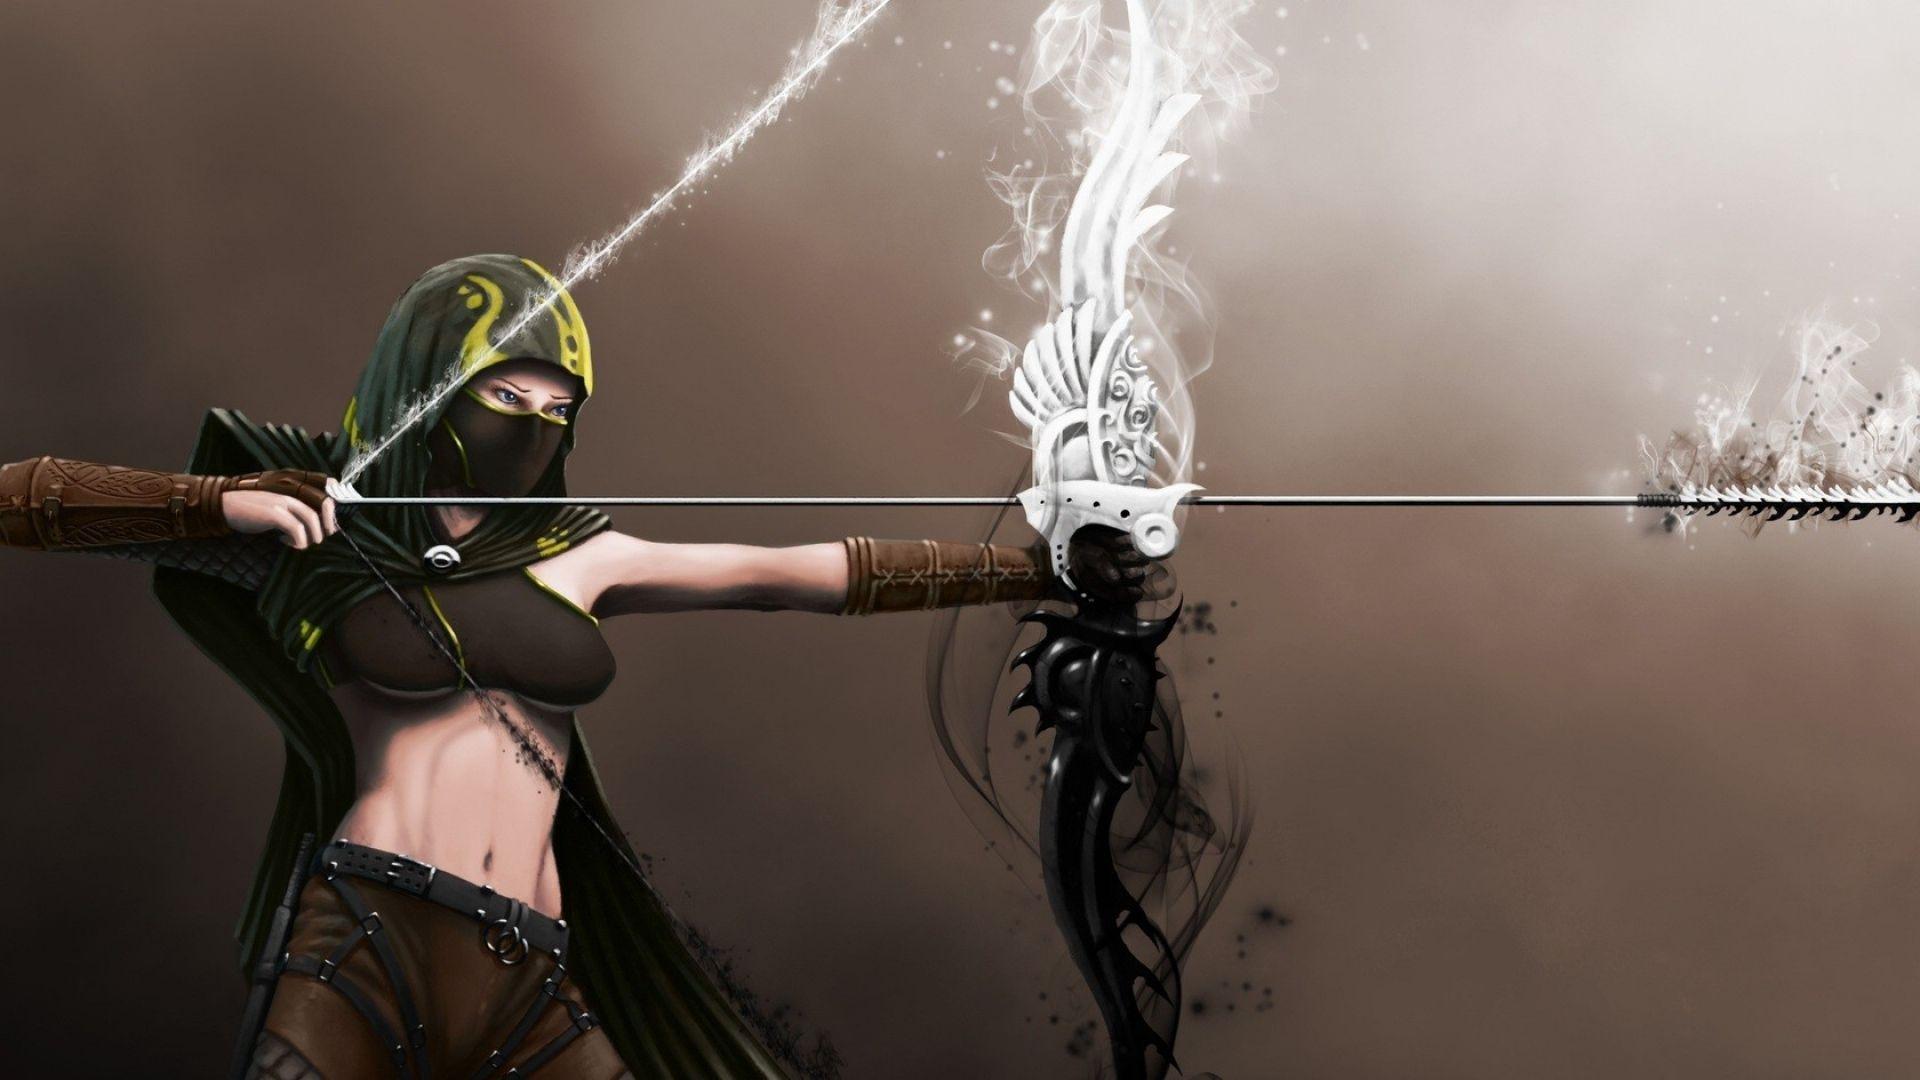 bow and arrow wallpaper. Bow